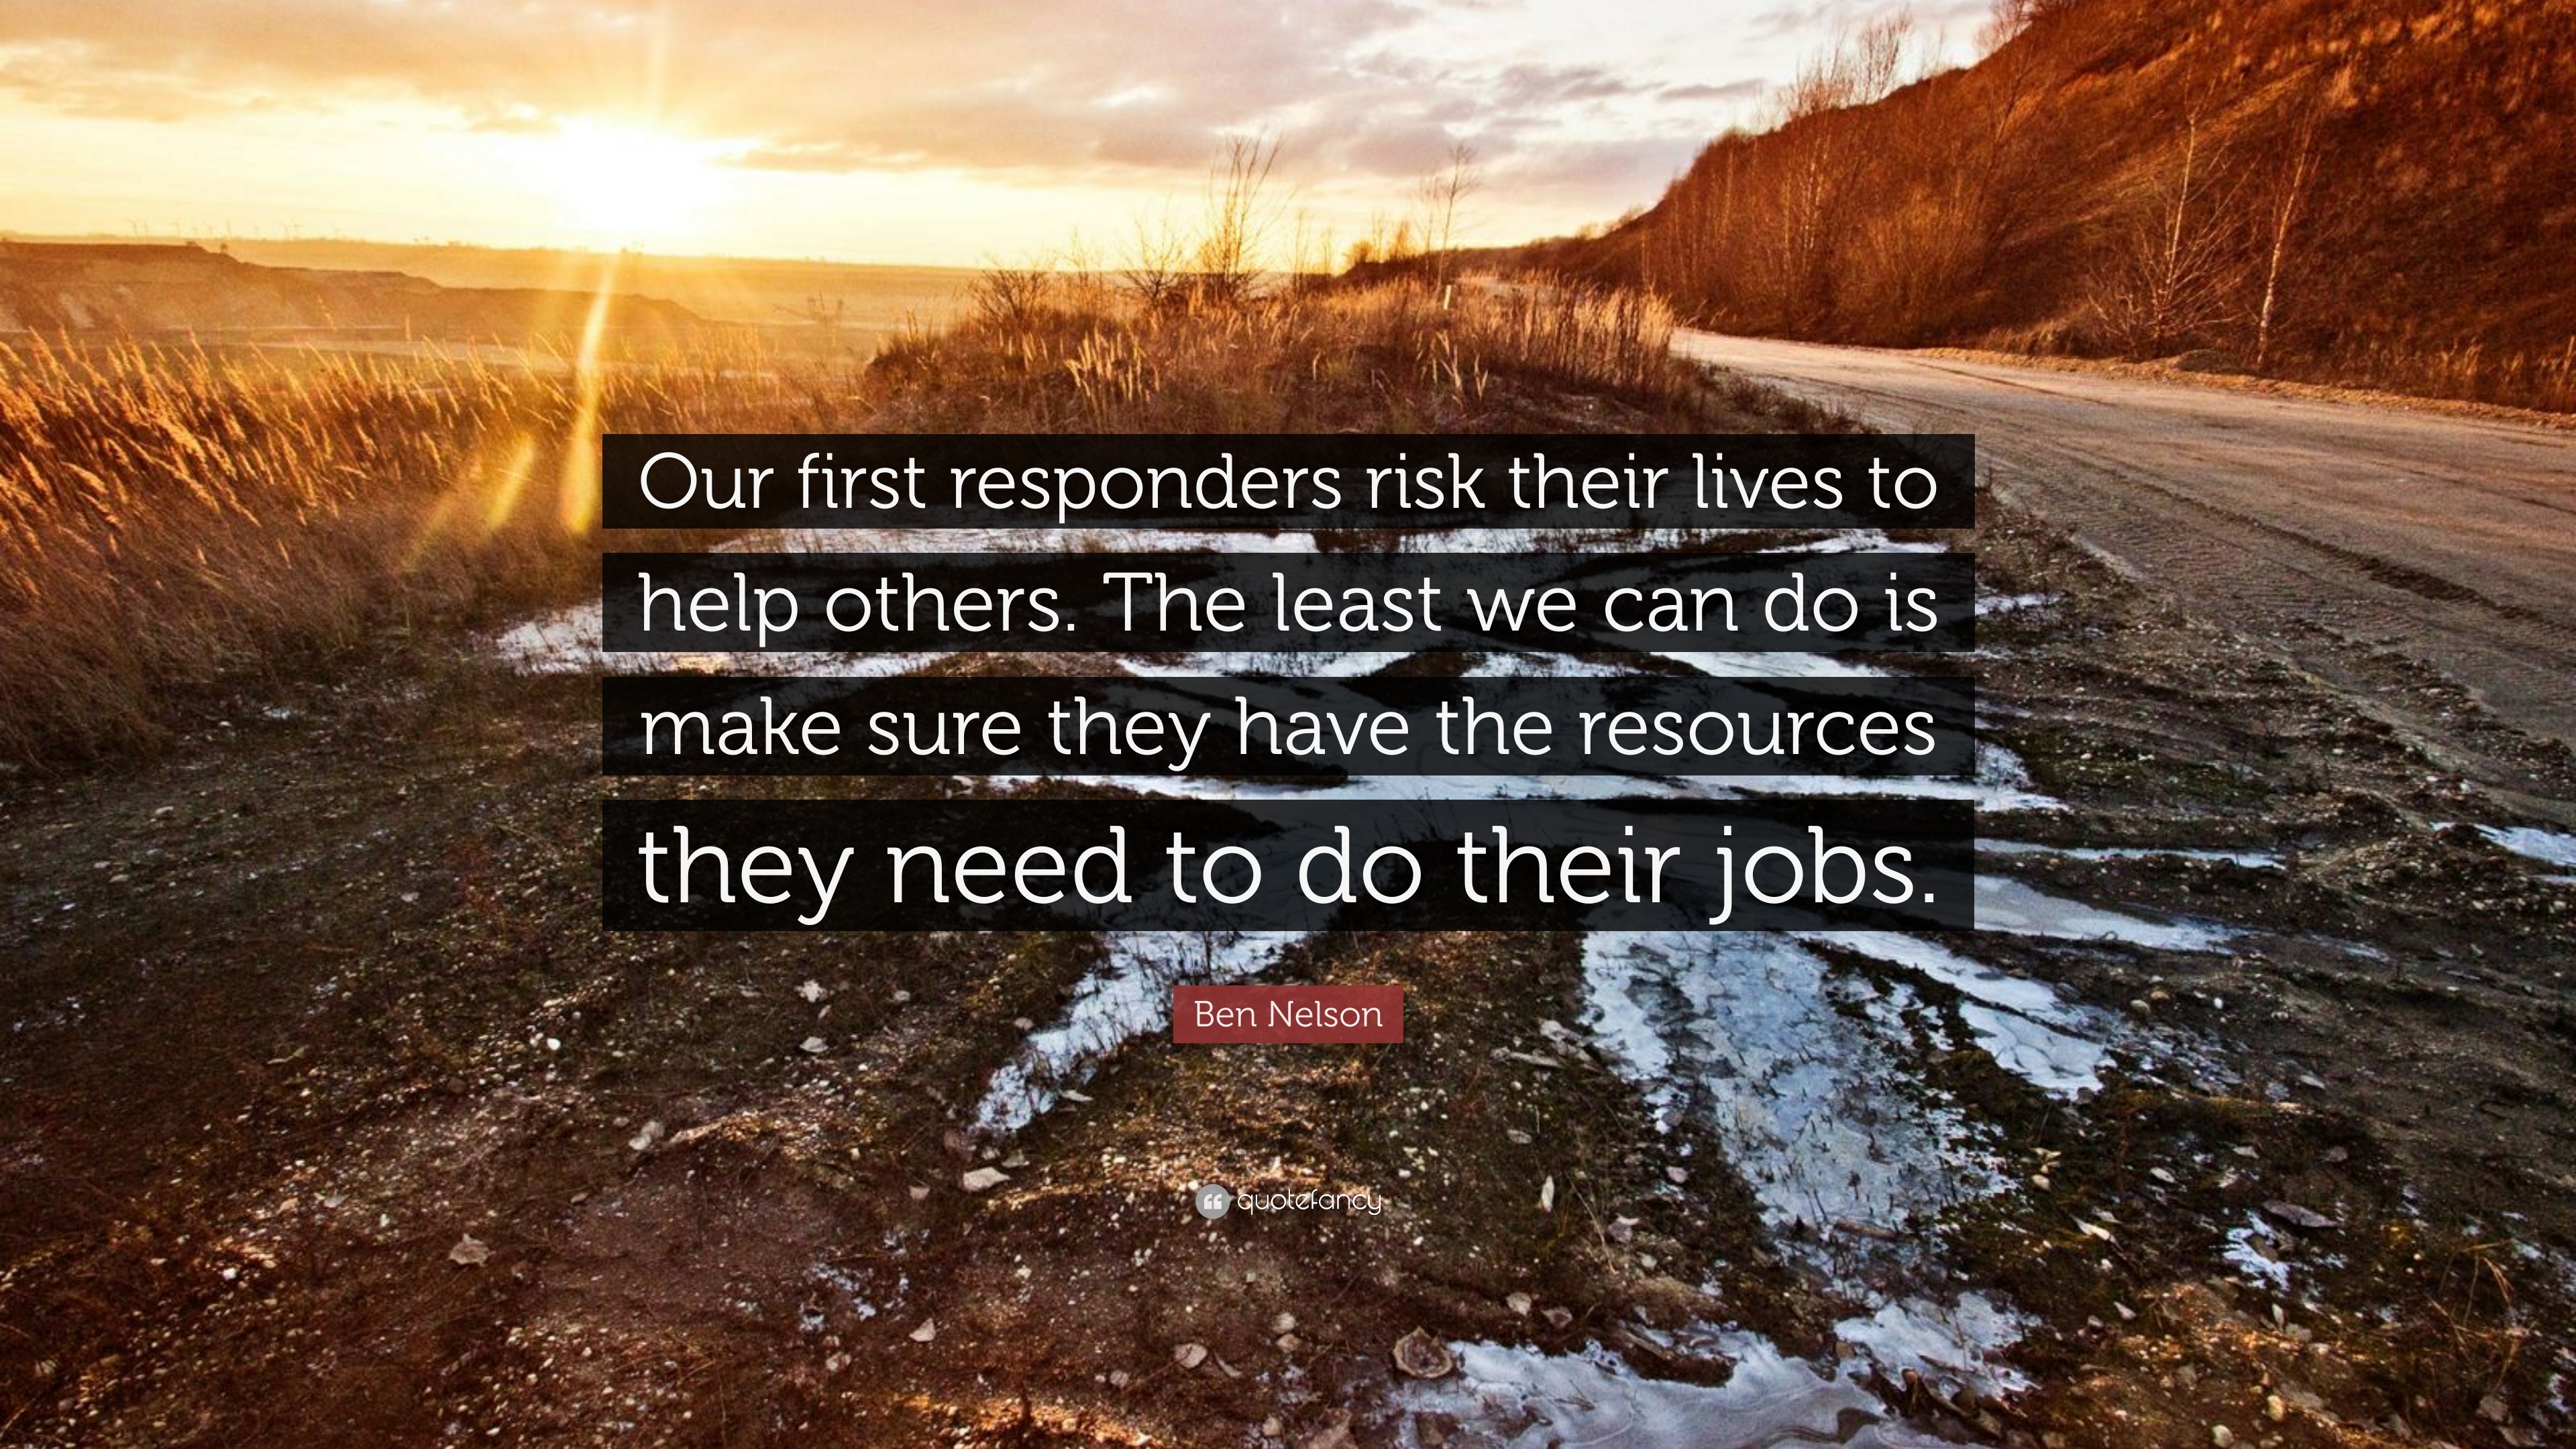 Ben Nelson Quote: “Our first responders risk their lives to help others. The least we can do is make sure they have the resources they need.”